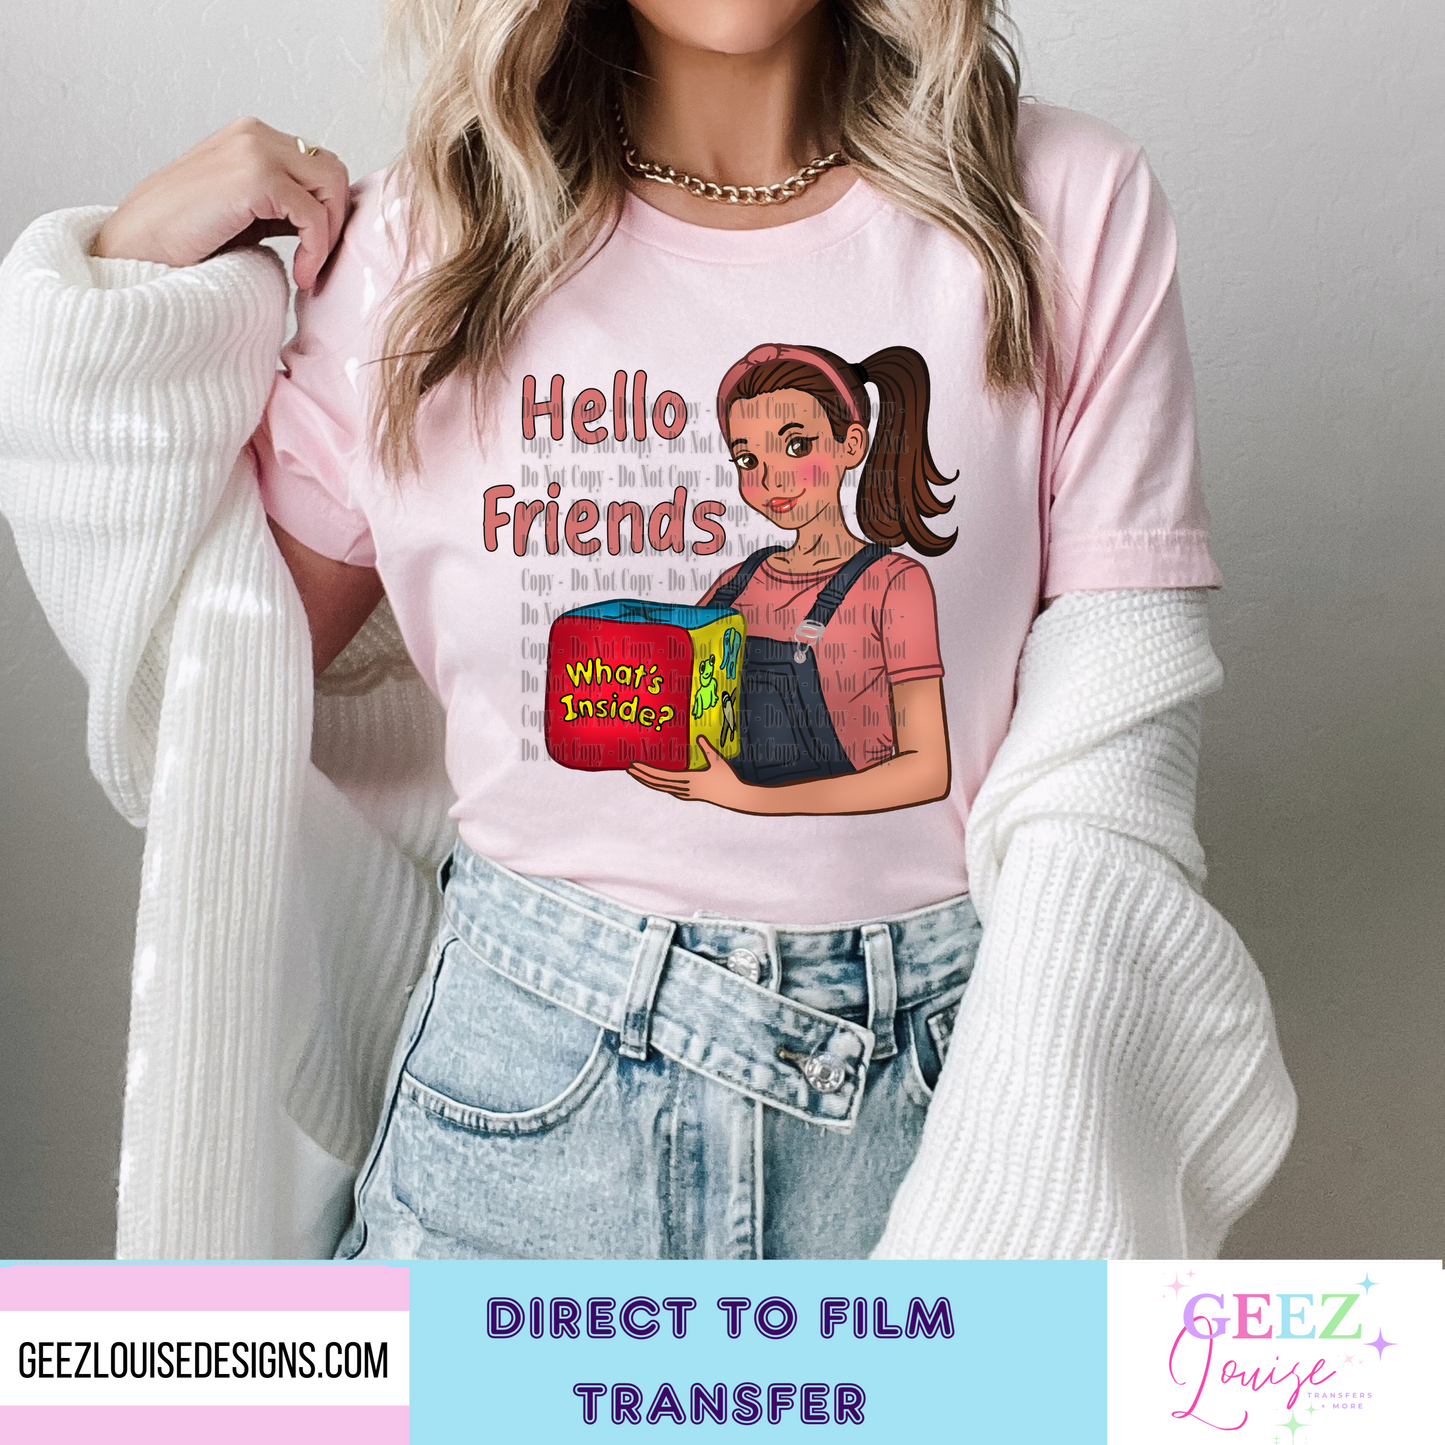 hello friends- Direct to Film Transfer - made to order